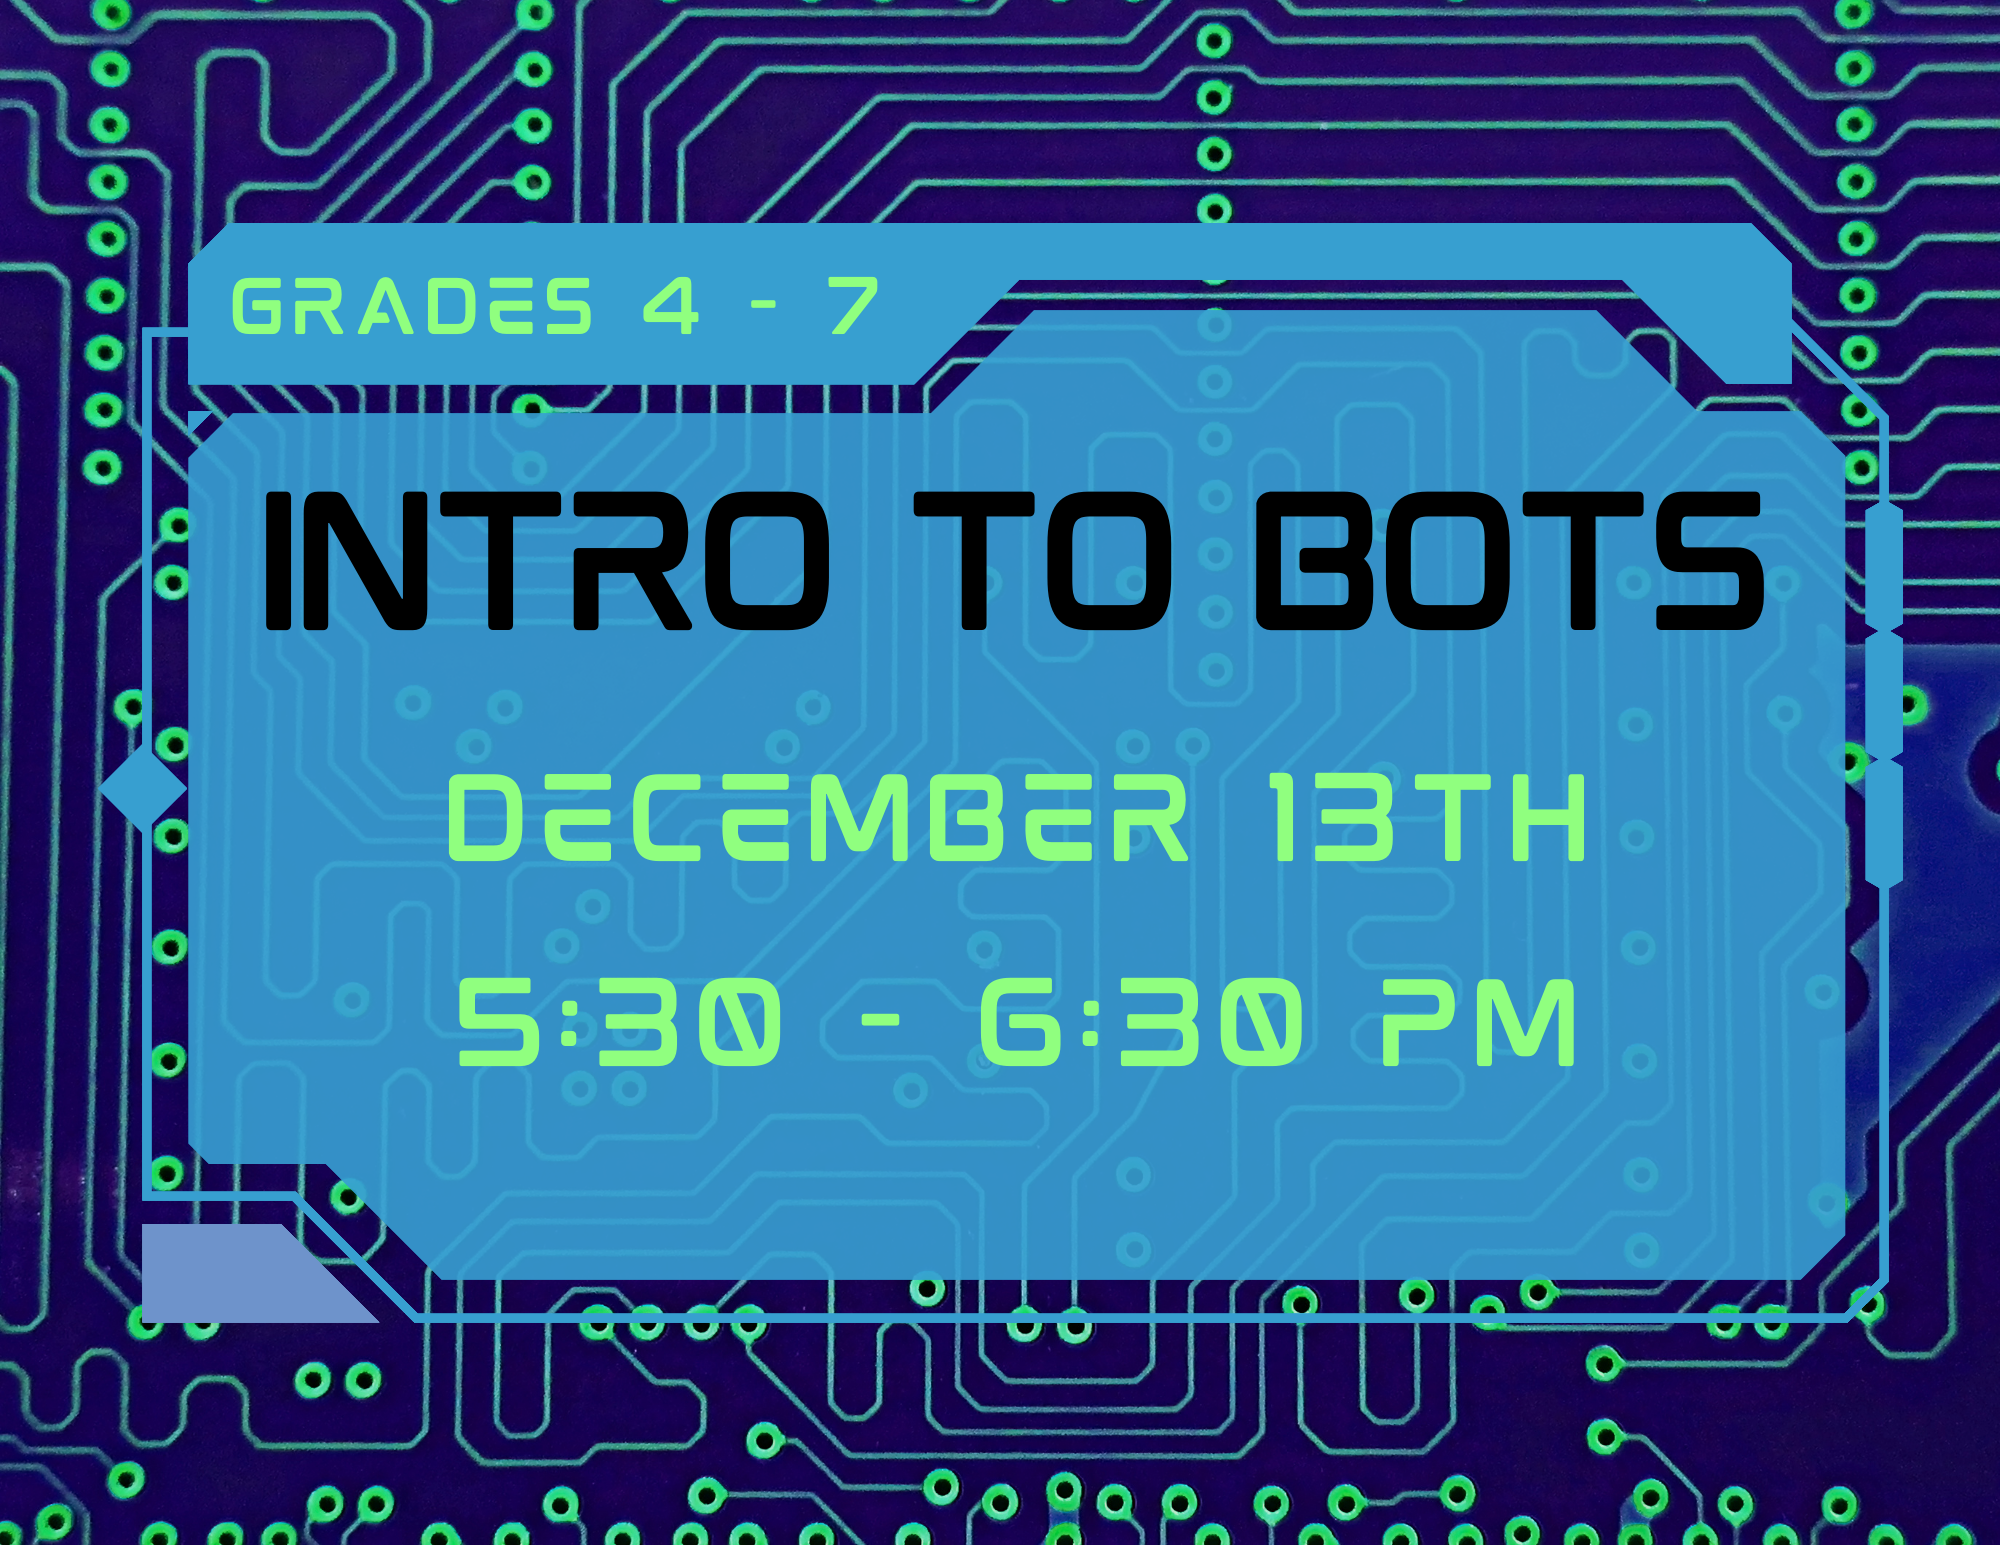 Program flyer featuring the following text "Intro to Bots. Grades 4-7. December 13th. 5:30-6:30pm."